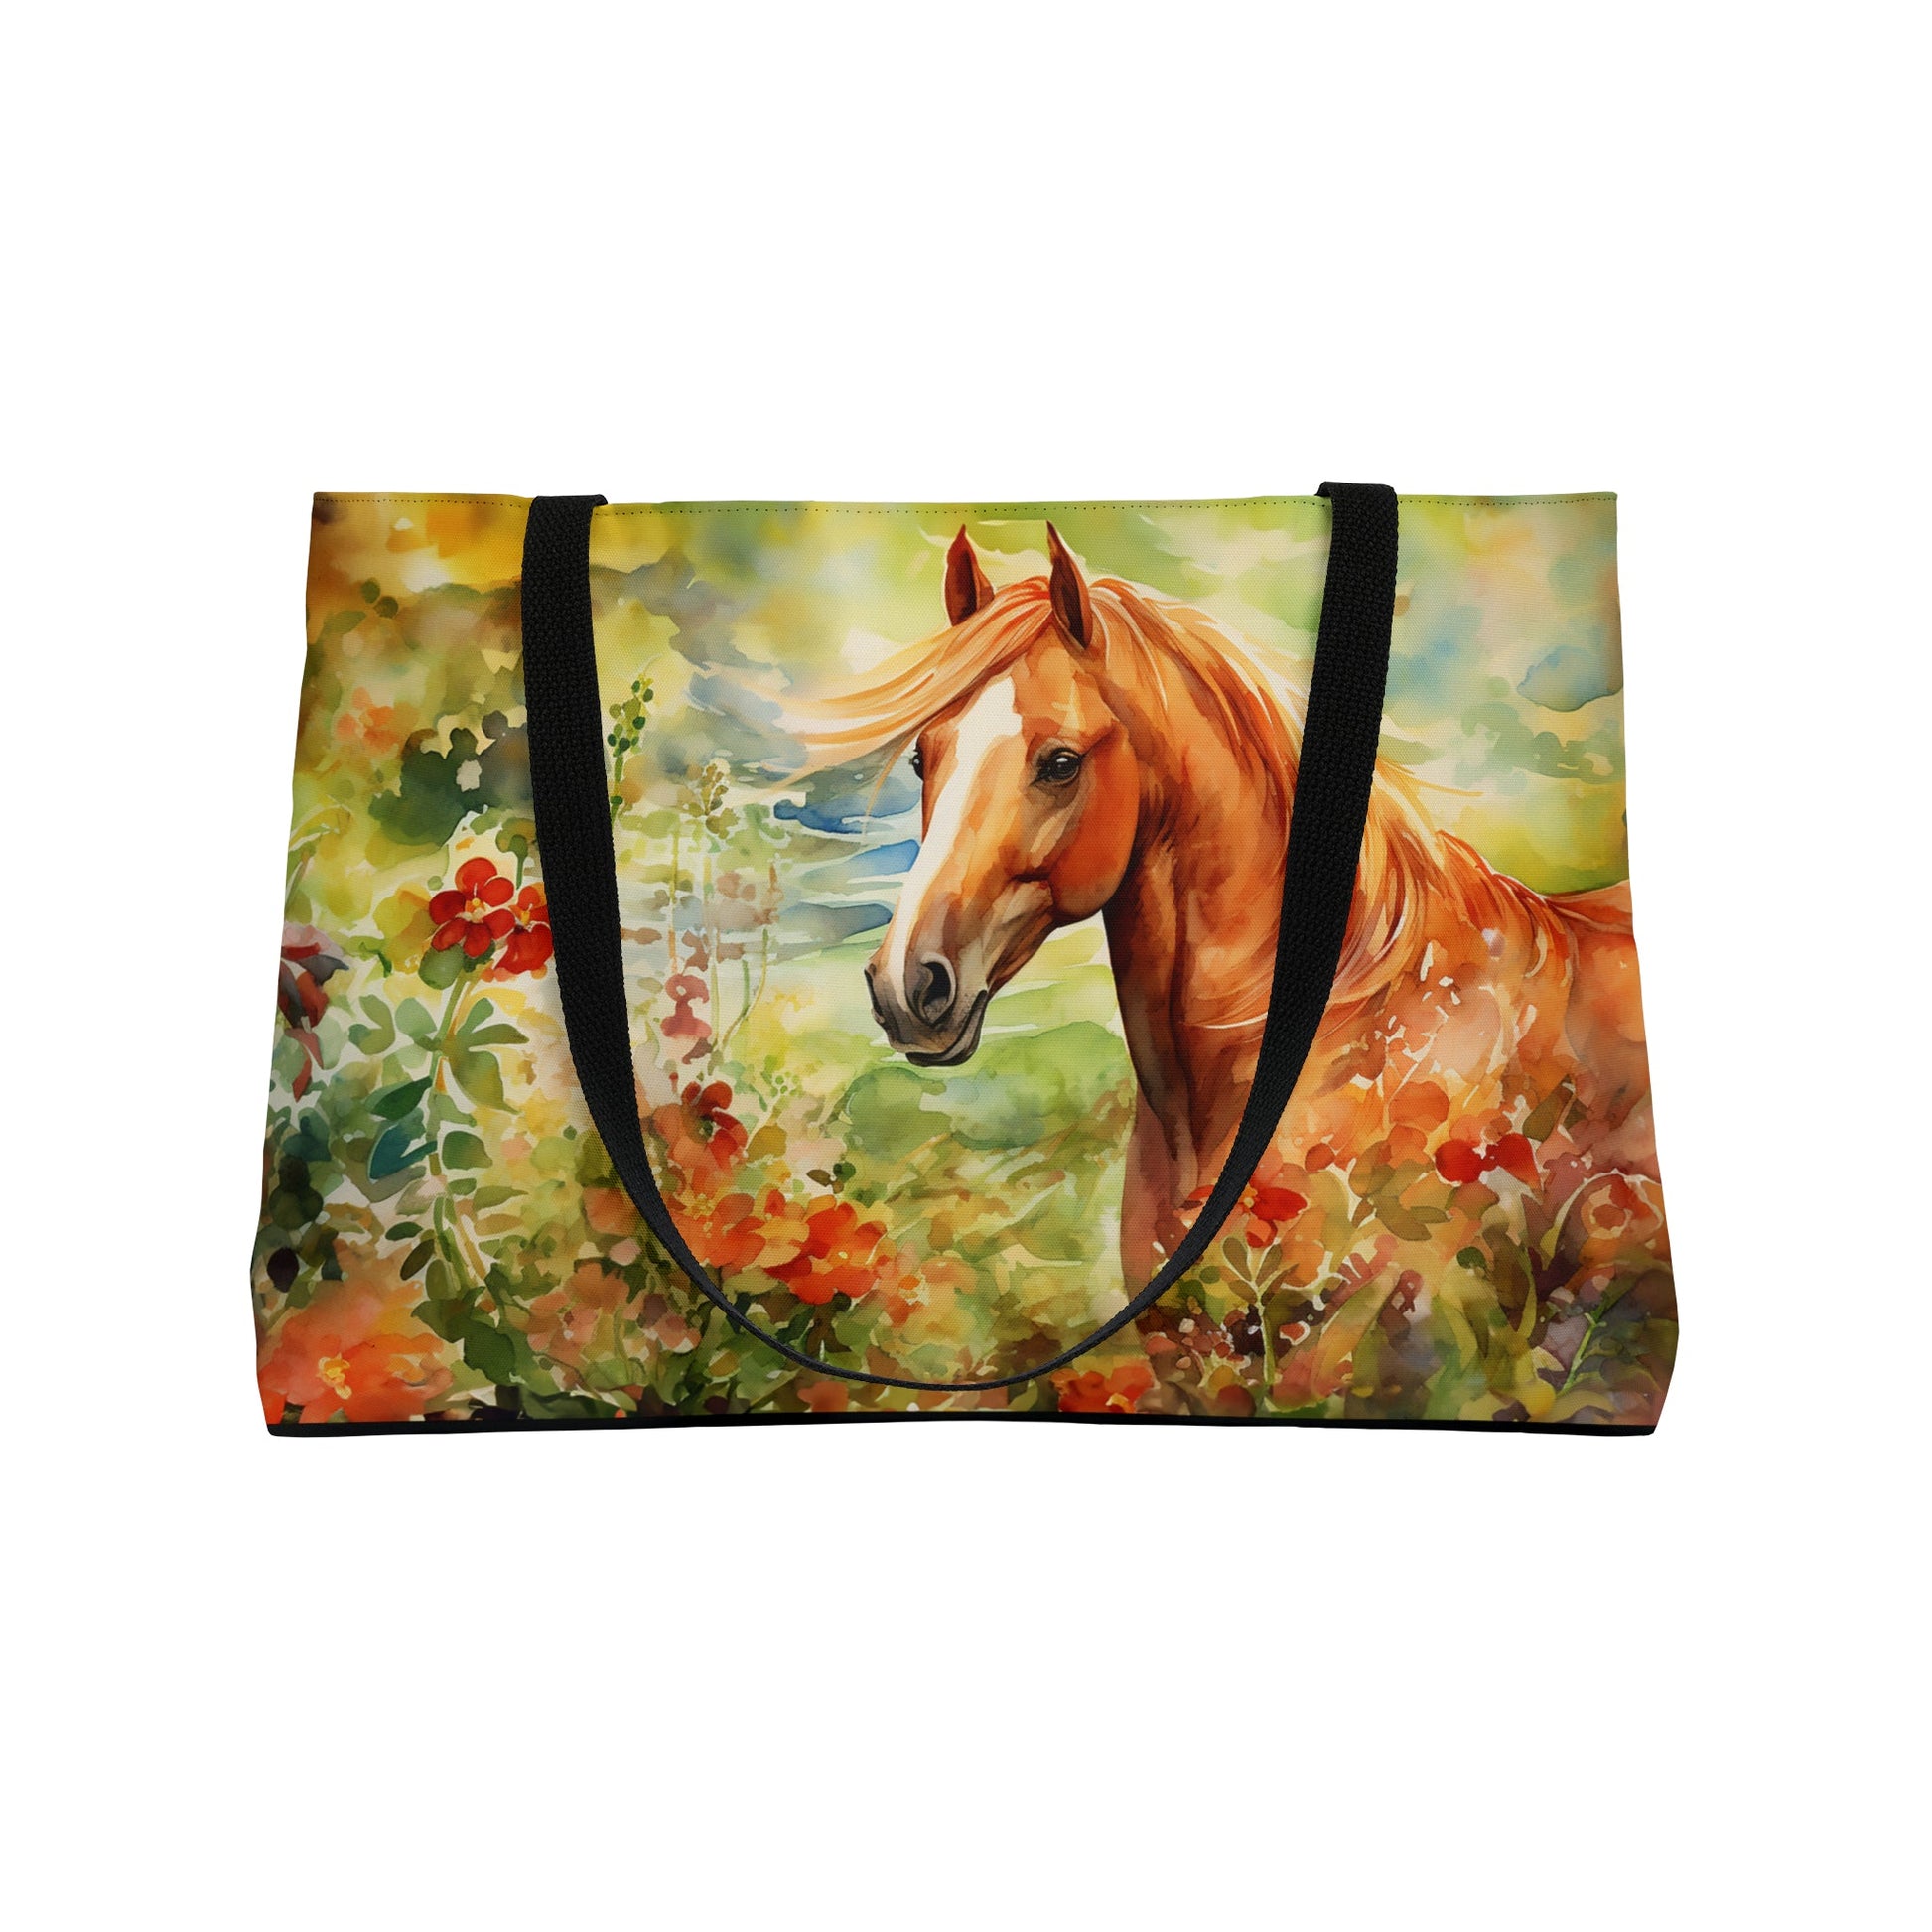 Horse and Garden Print on Extra Large Weekender Tote Bag, Watercolor Art Overnight Carry All Bag - FlooredByArt